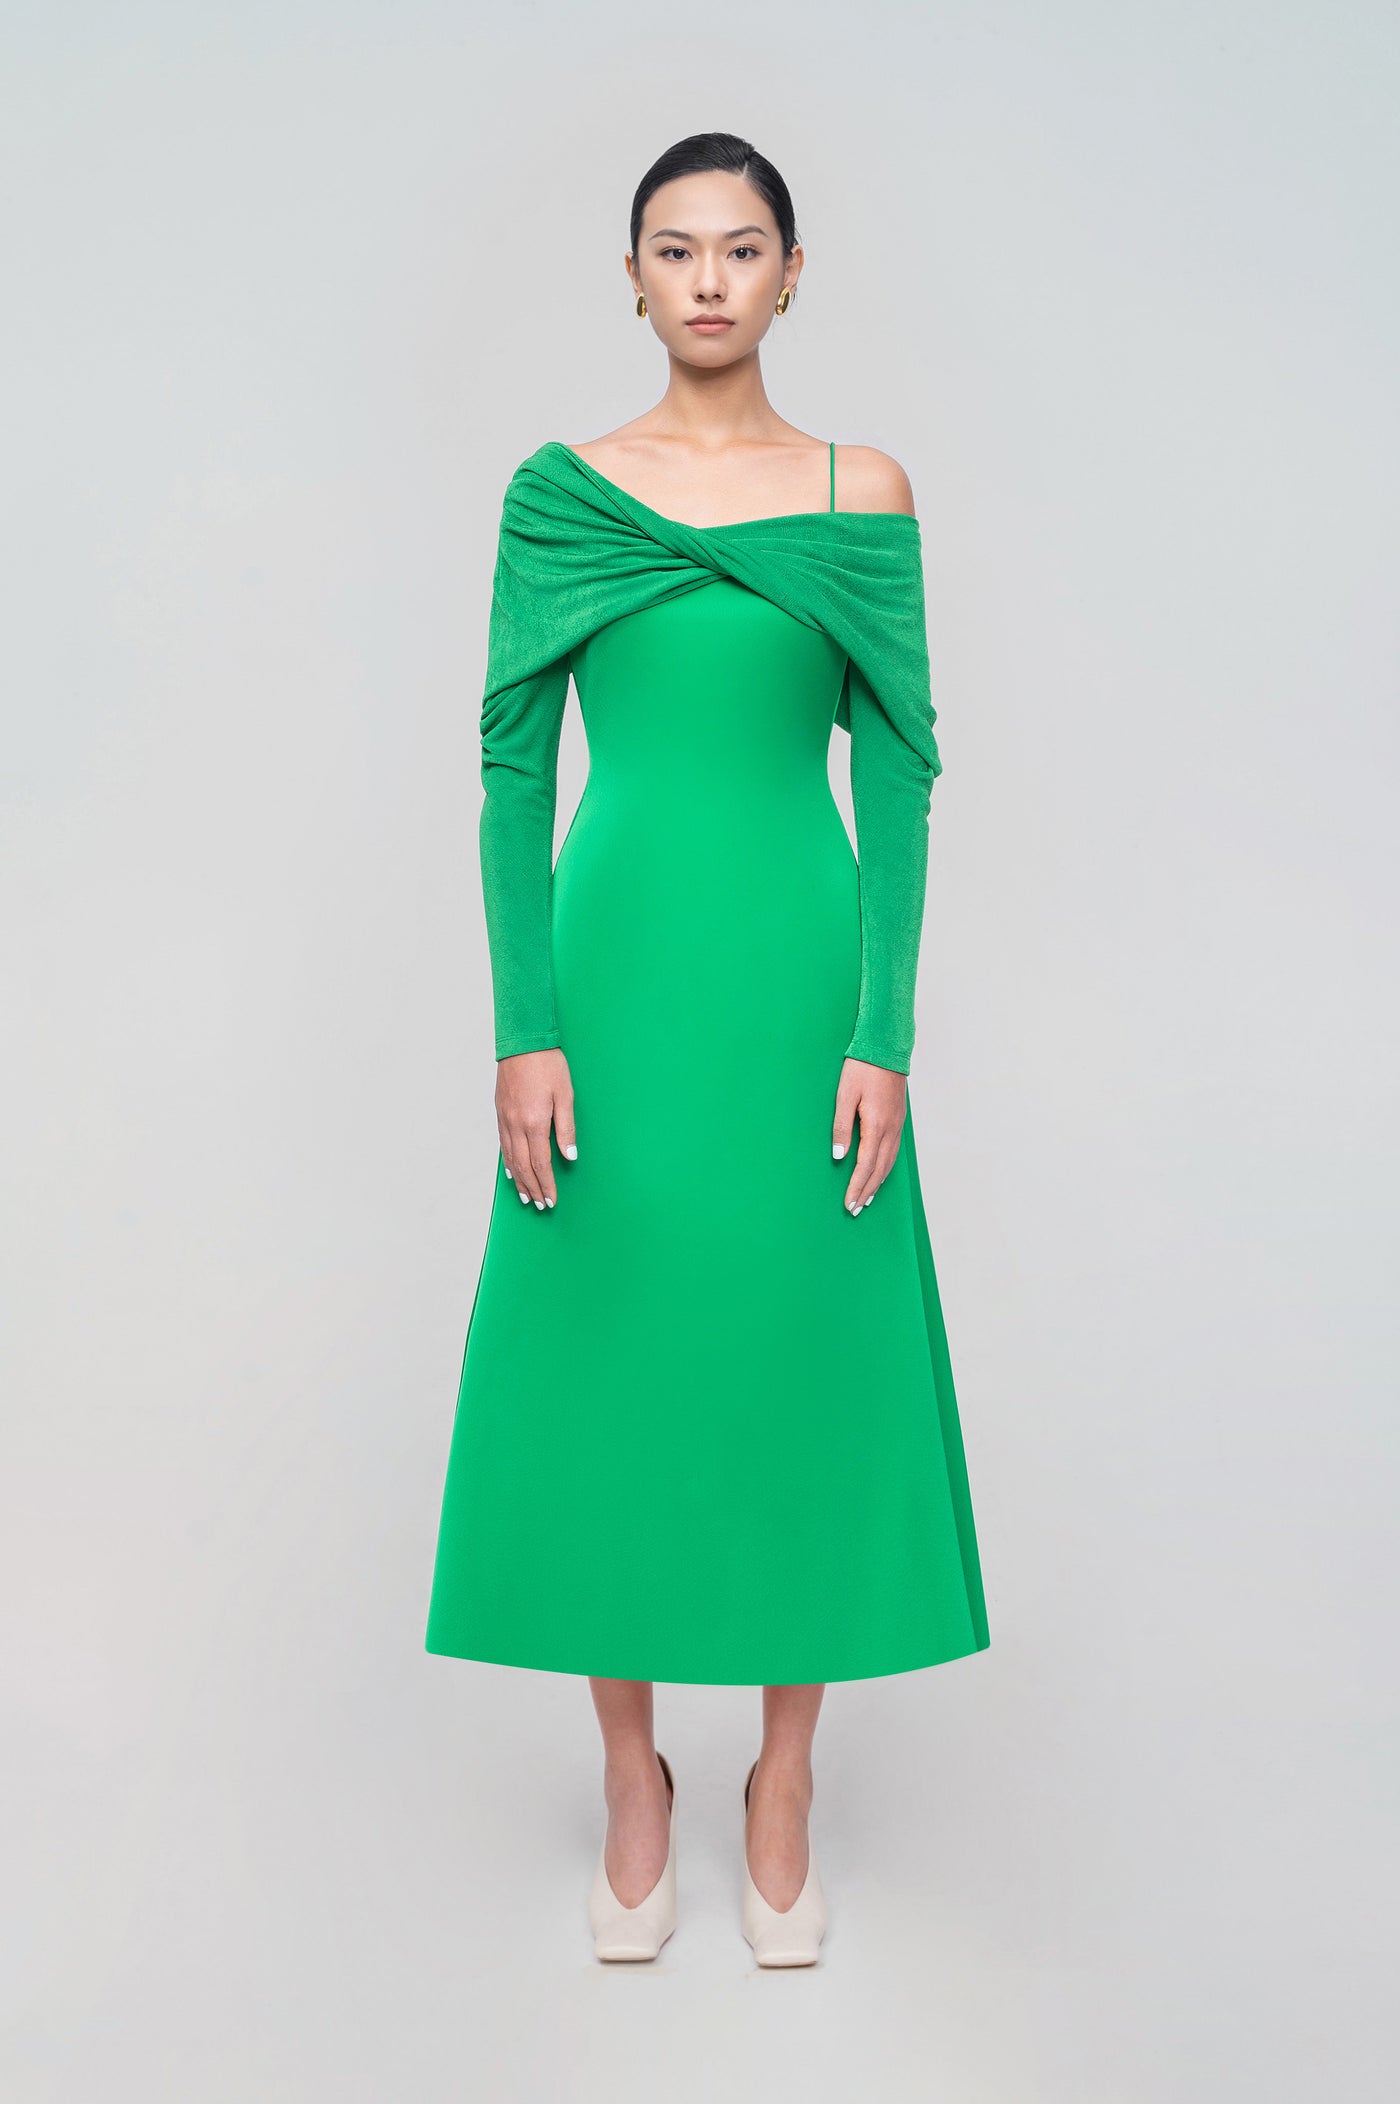 A-shape dress  with off-shoulder neckline
and pleated detail